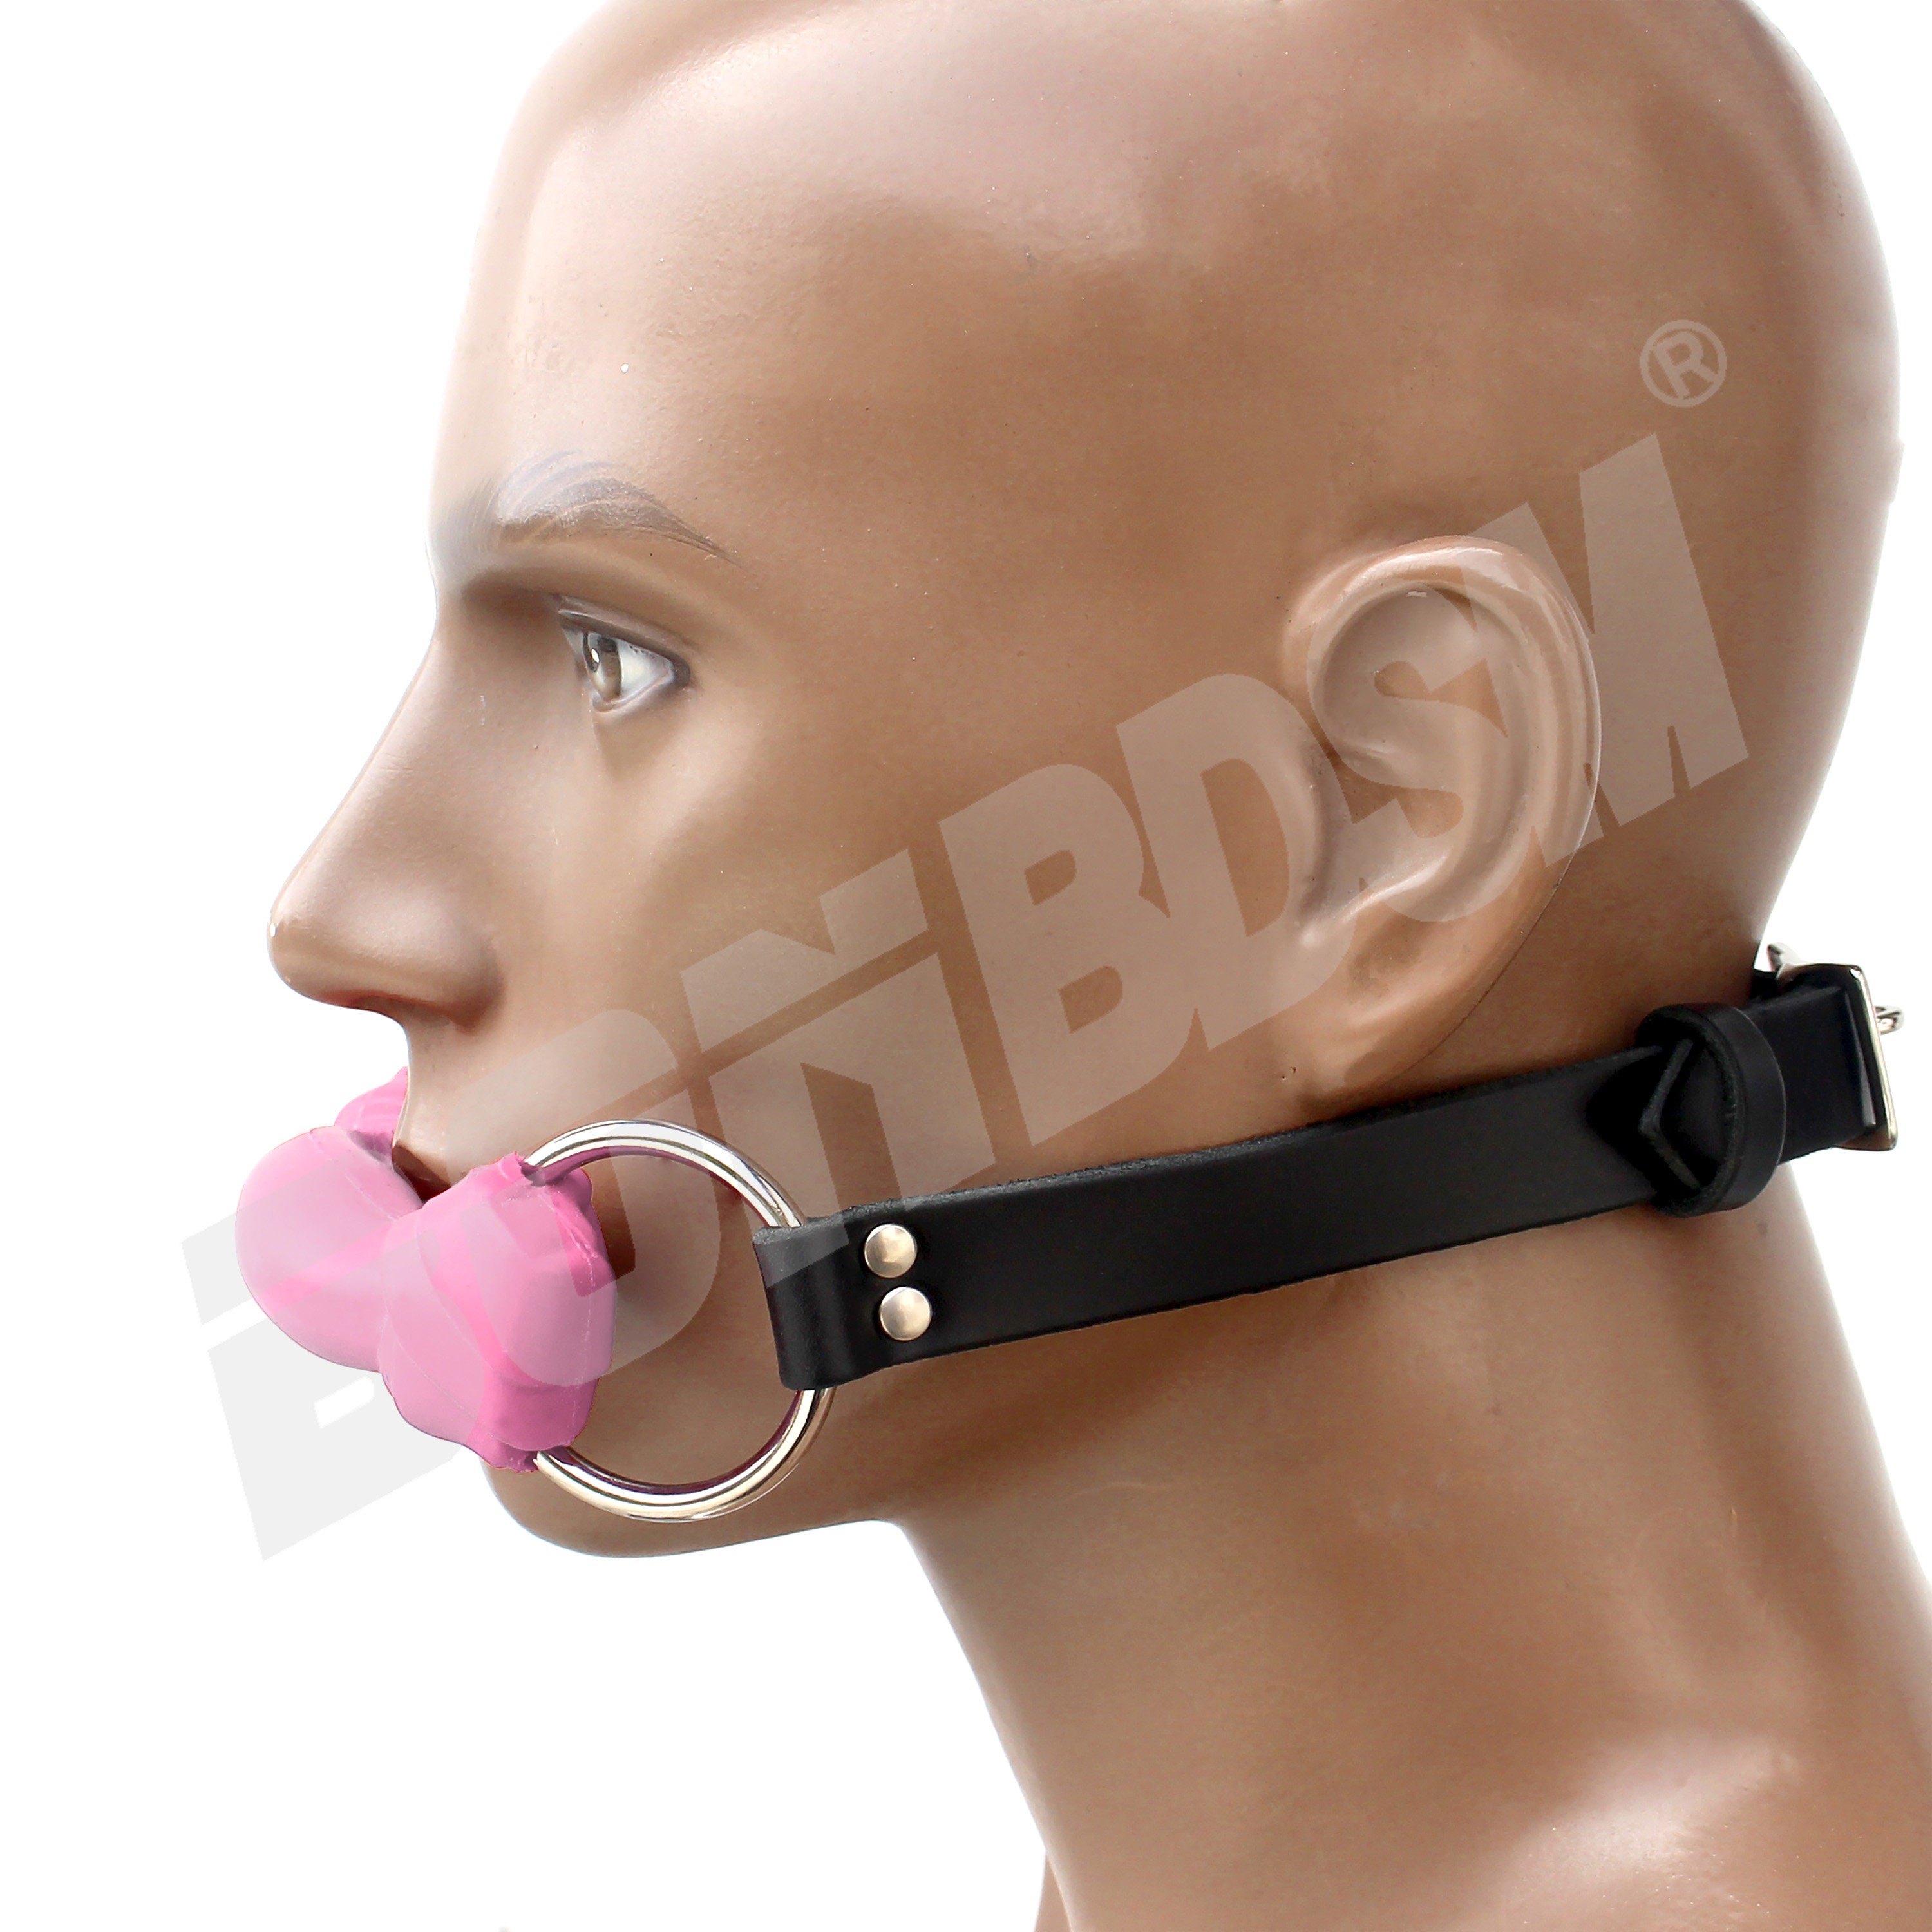 Dropship Oral Mouth Gag BDSM Bite Silicone Dog Bone Gag Mouth Gag SM  Bondage Restraint Mouth Plug Adult Sex Toys Ball Gag For Adult Games to  Sell Online at a Lower Price